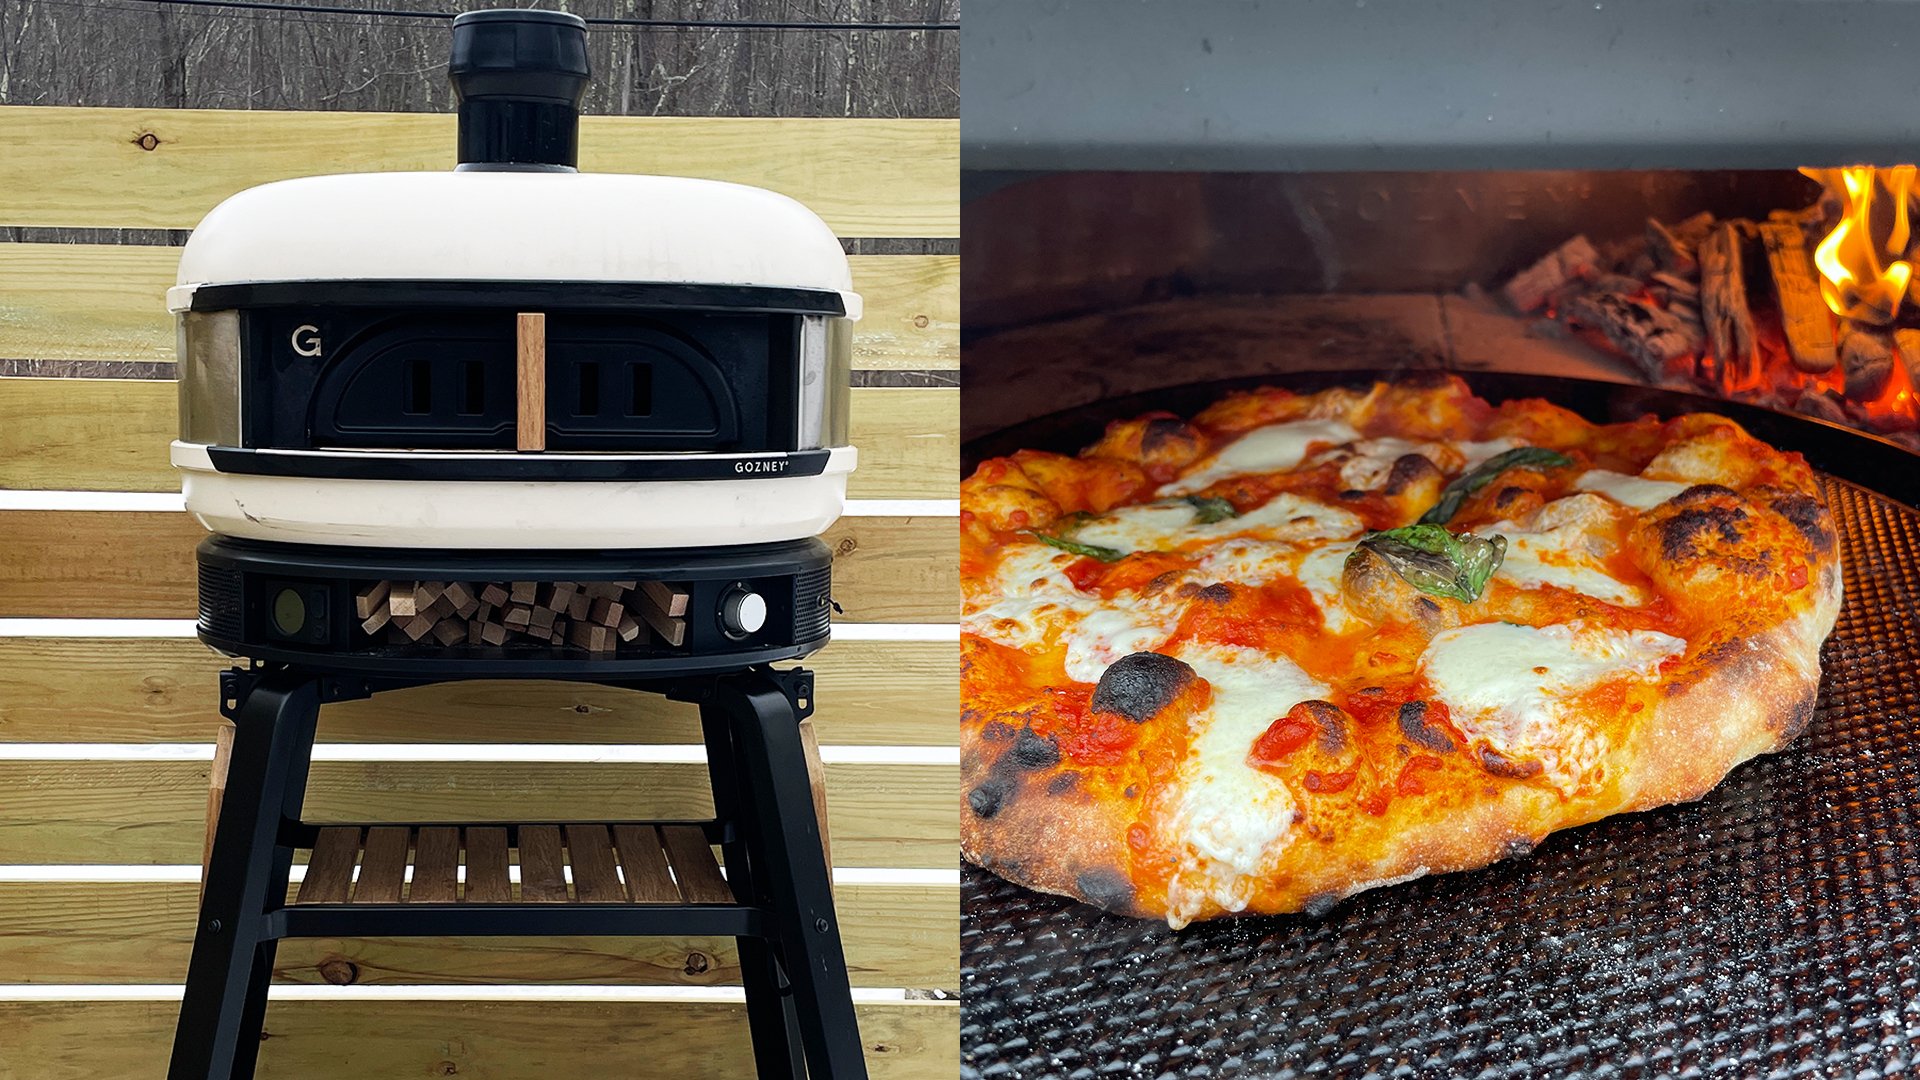 Skip the pizza delivery and opt for one of these top pizza ovens